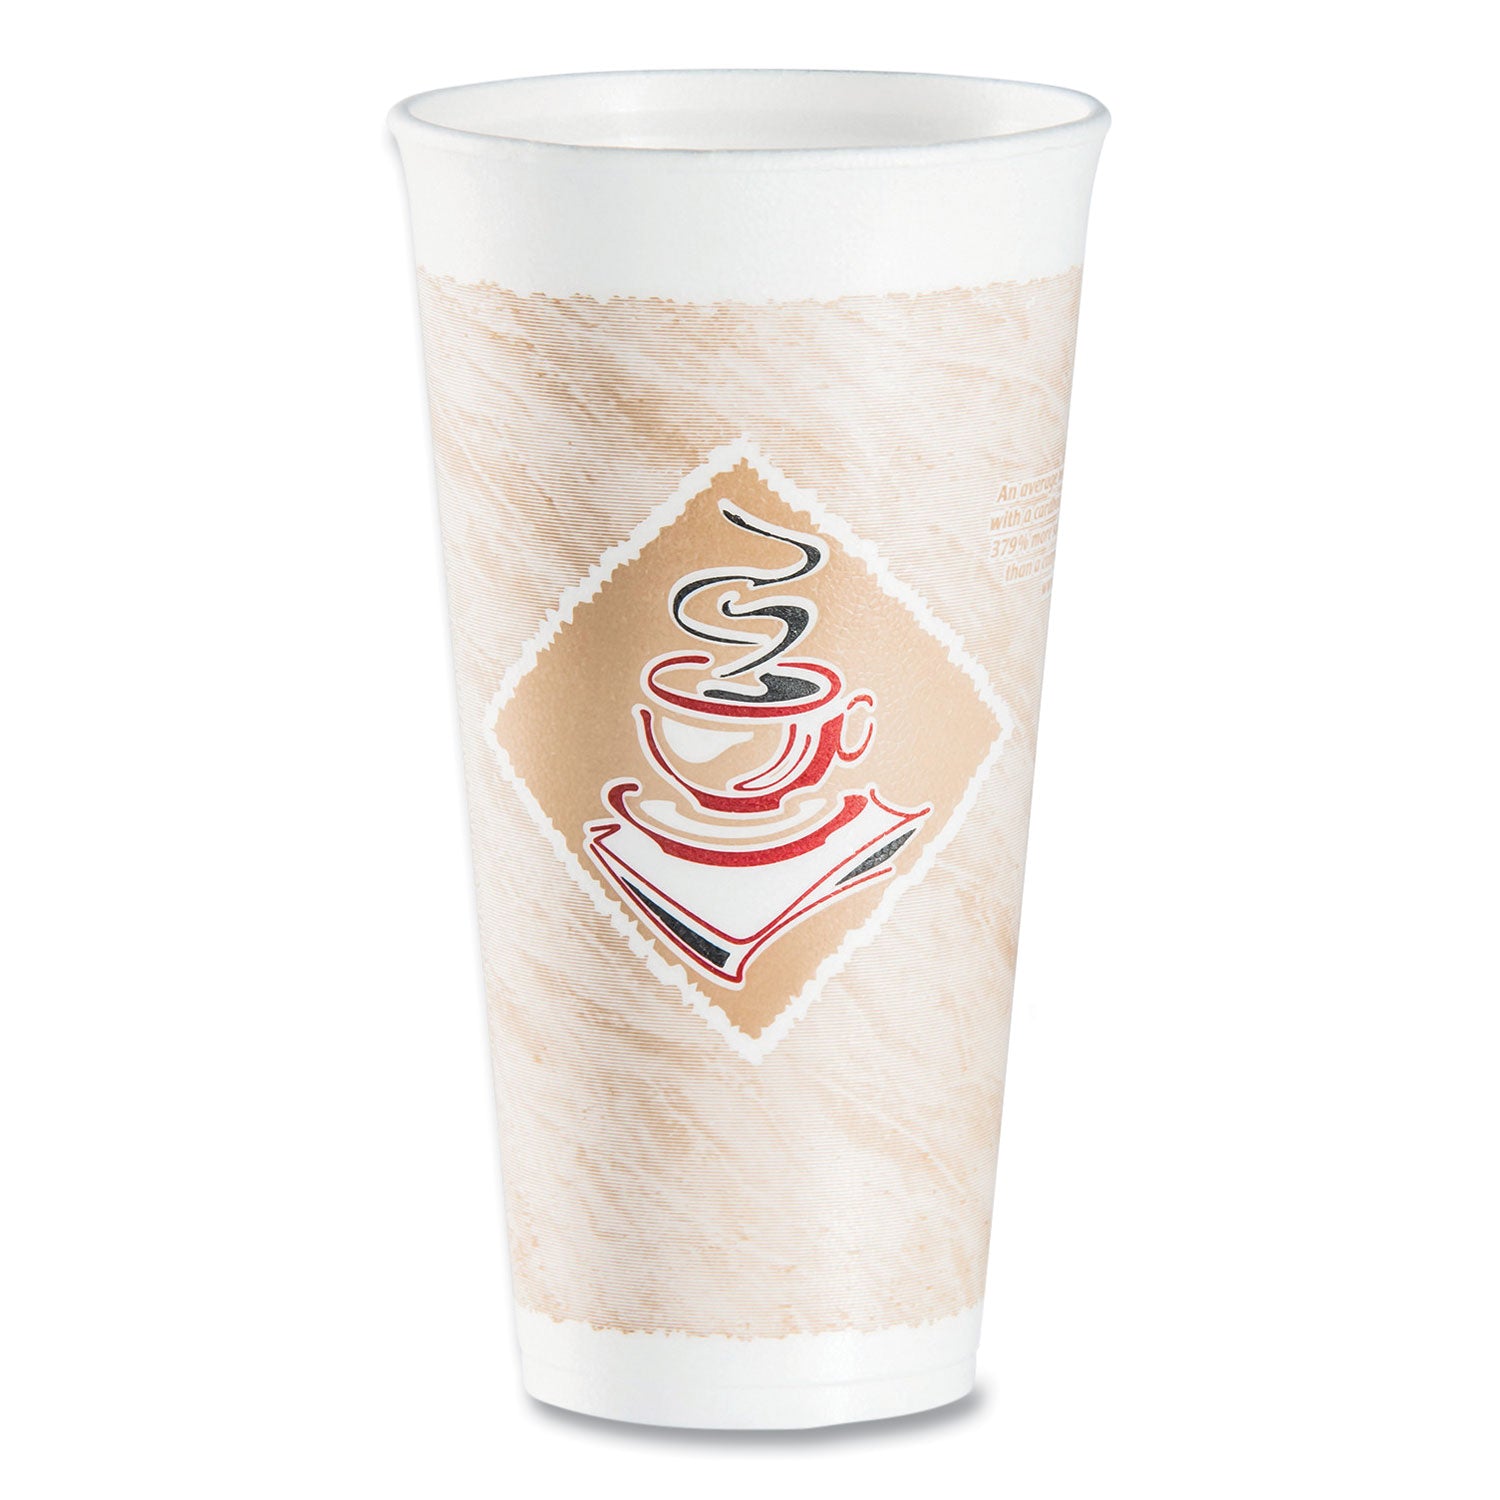 Cafe G Foam Hot/Cold Cups, 20 oz, Brown/Red/White, 20/Pack - 